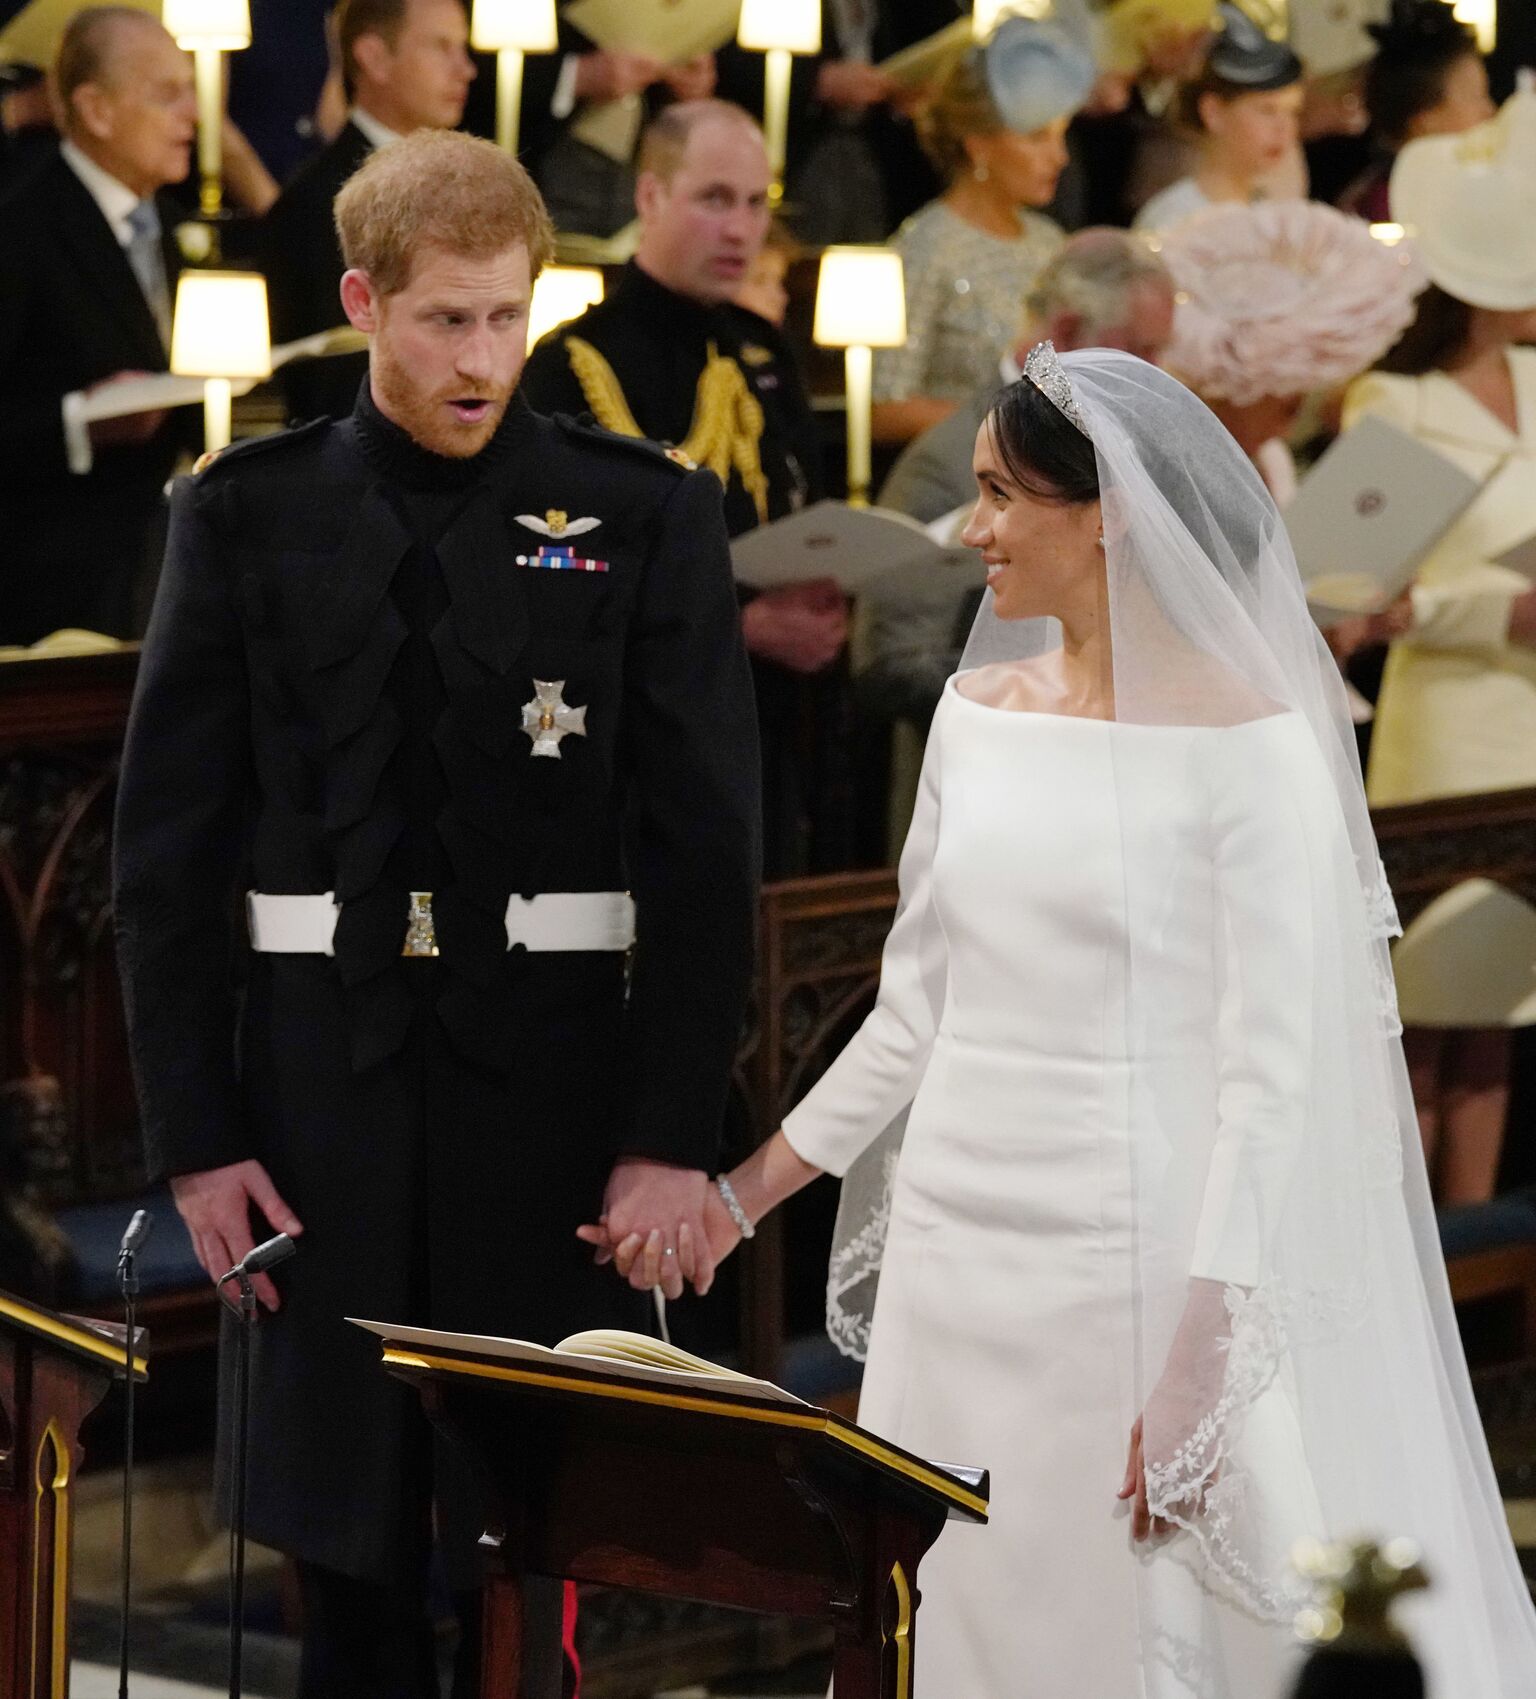 Prince Harry stands with his bride, Meghan Markle, during their wedding in St George's Chapel at Windsor Castle  | Getty Images